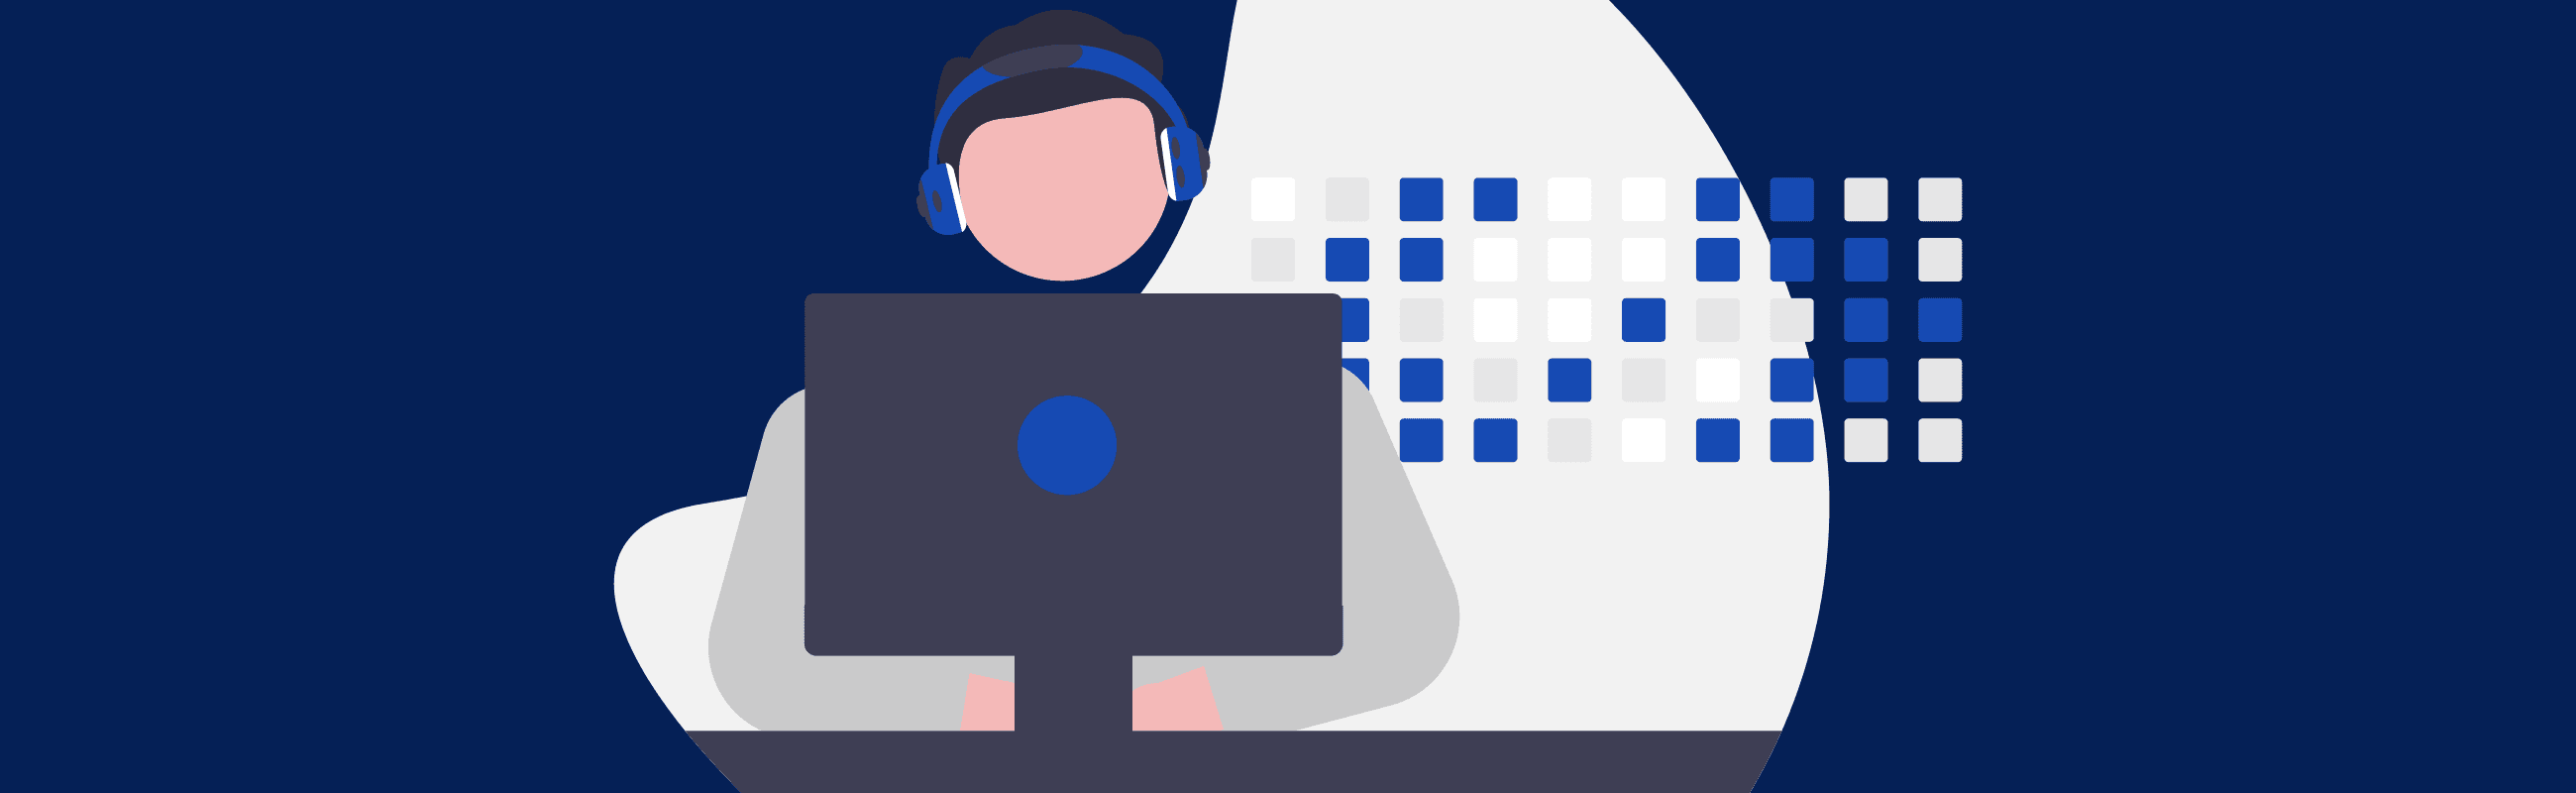 Illustration of a man working at a computer.
